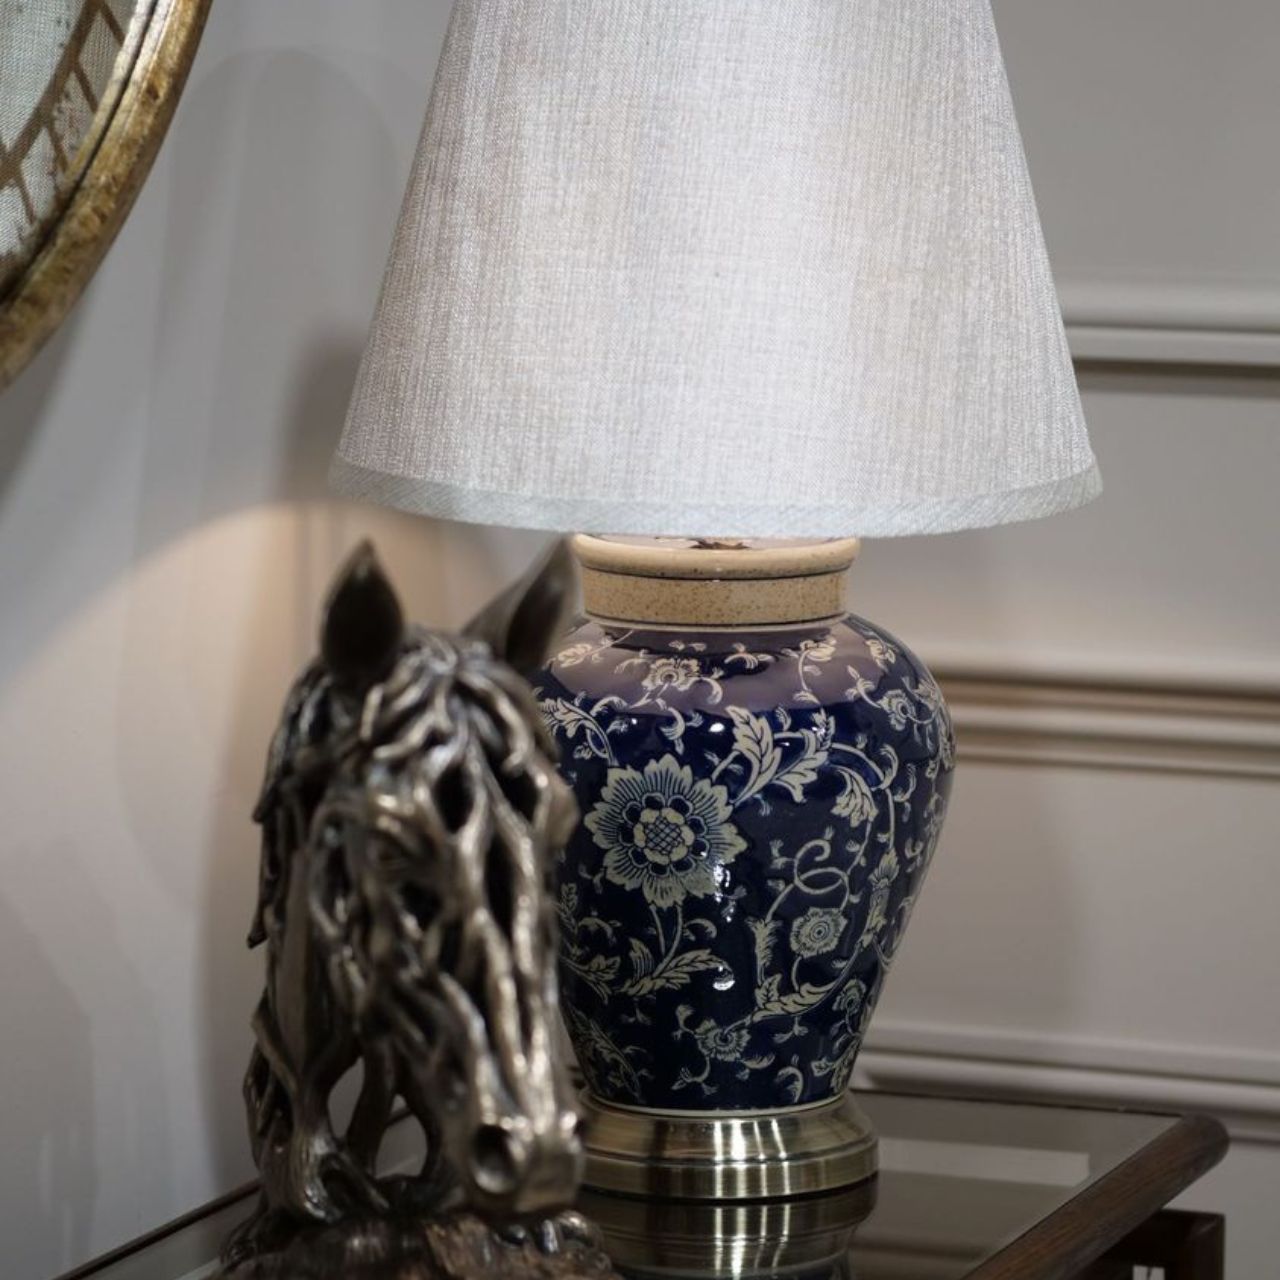 Tessa Lamp by Mindy Brownes  Blue ceramic floral pattern lamp. Brass antique bass and top. Off white linen shade.